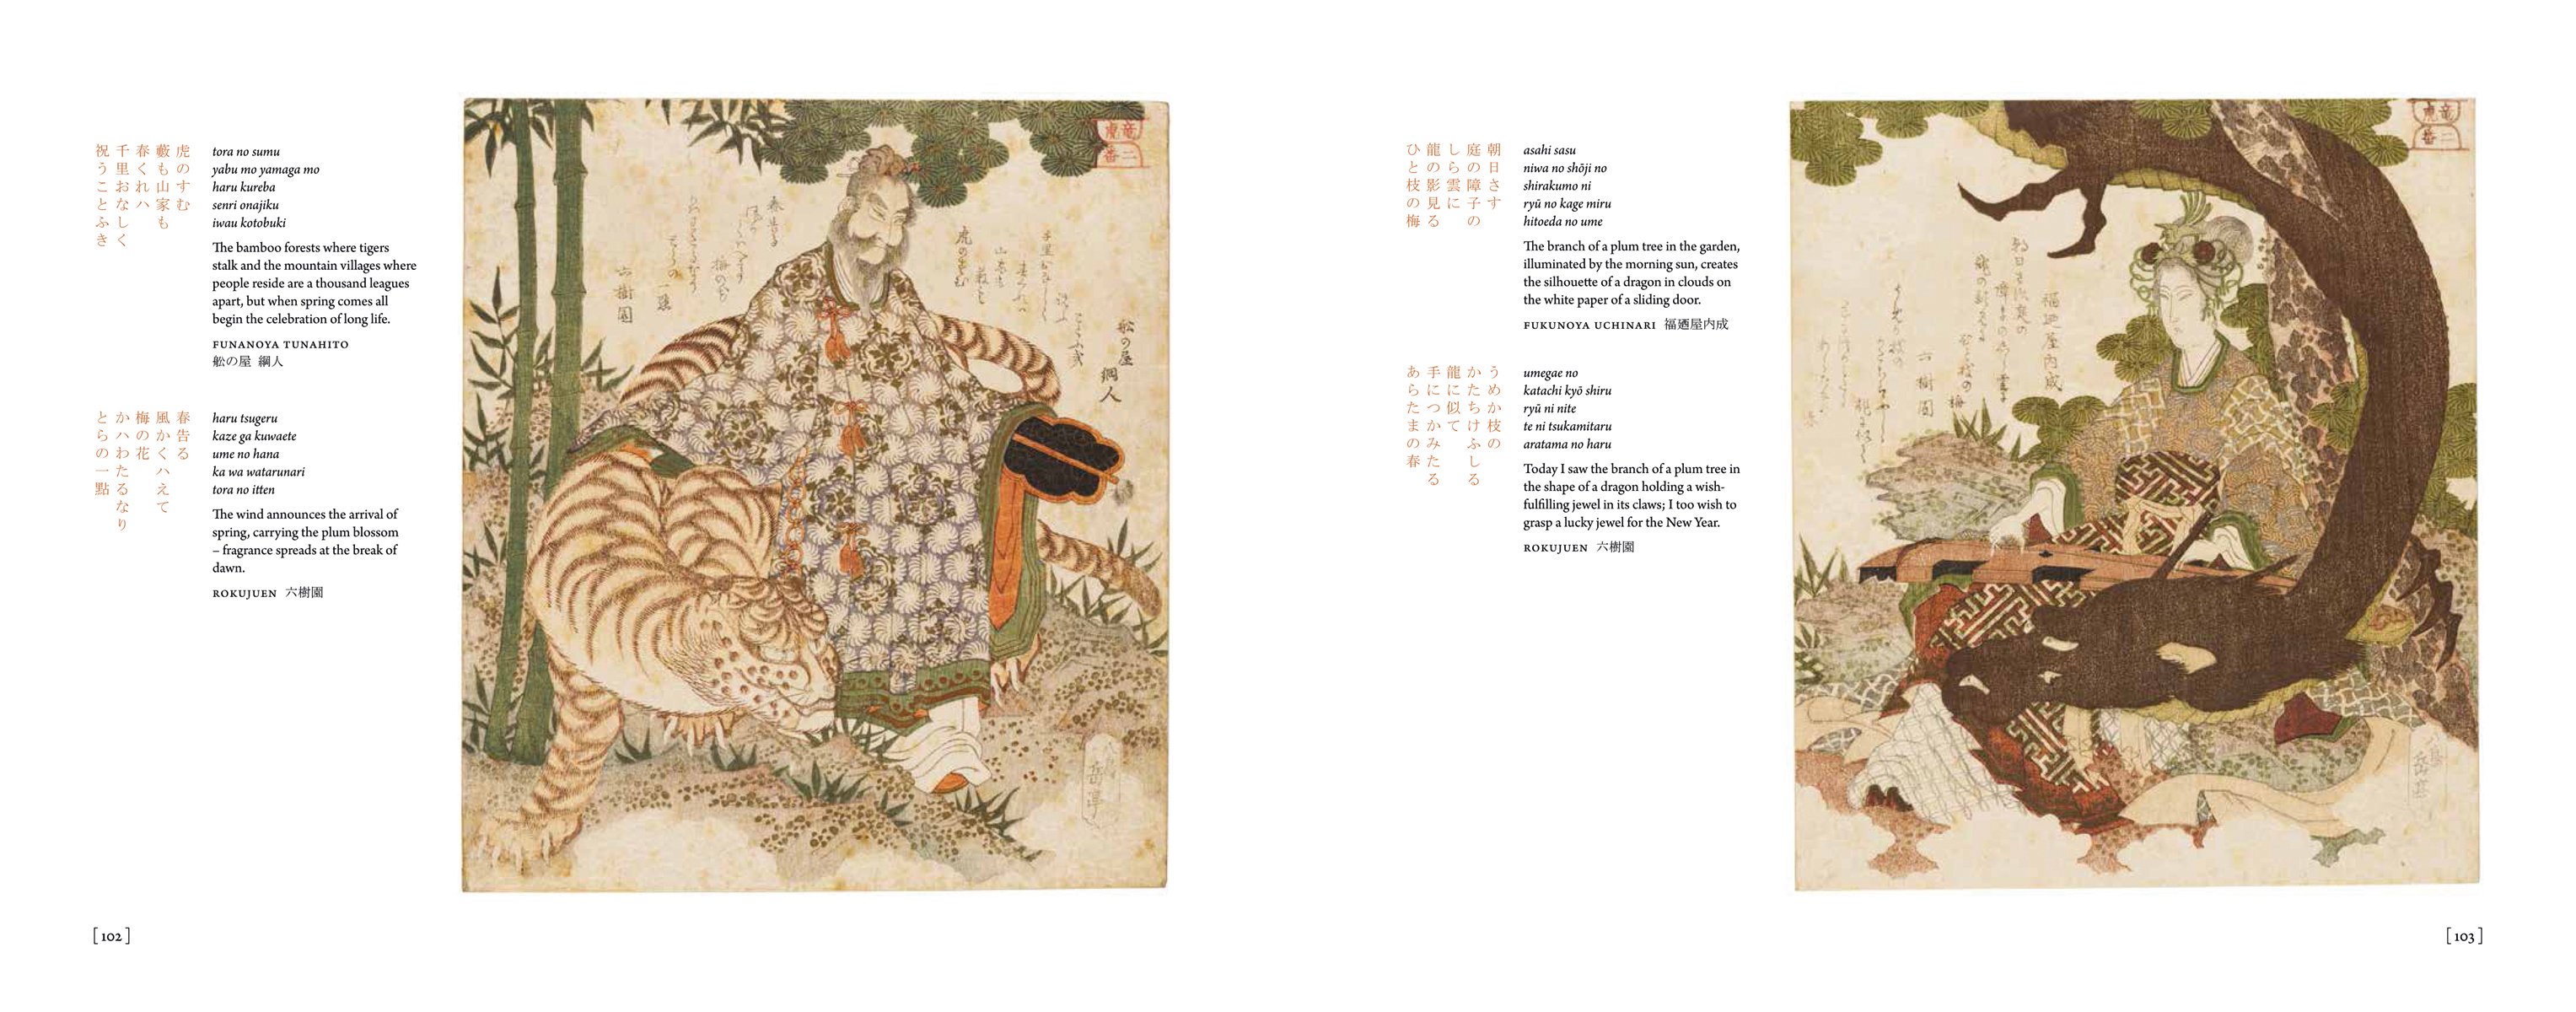 Japanese figure in Yukata, holding a Wagasa, Plum Blossom and Green Willow in red and green font on left beige banner